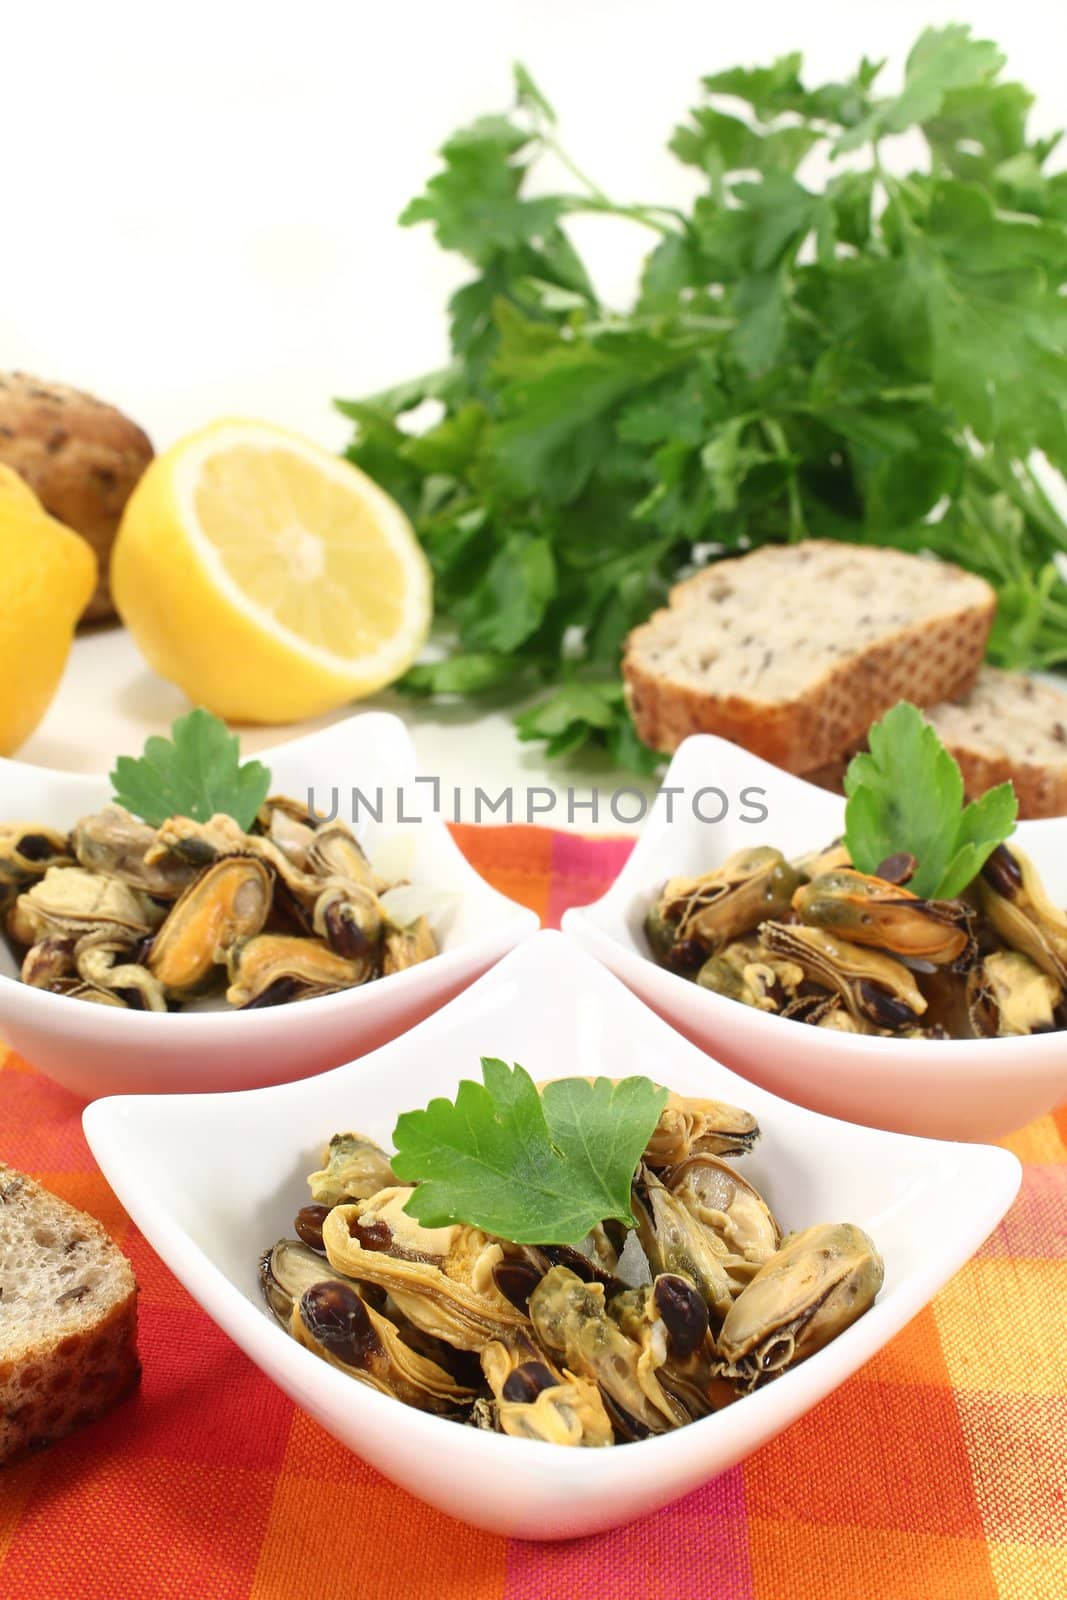 Mussels by silencefoto